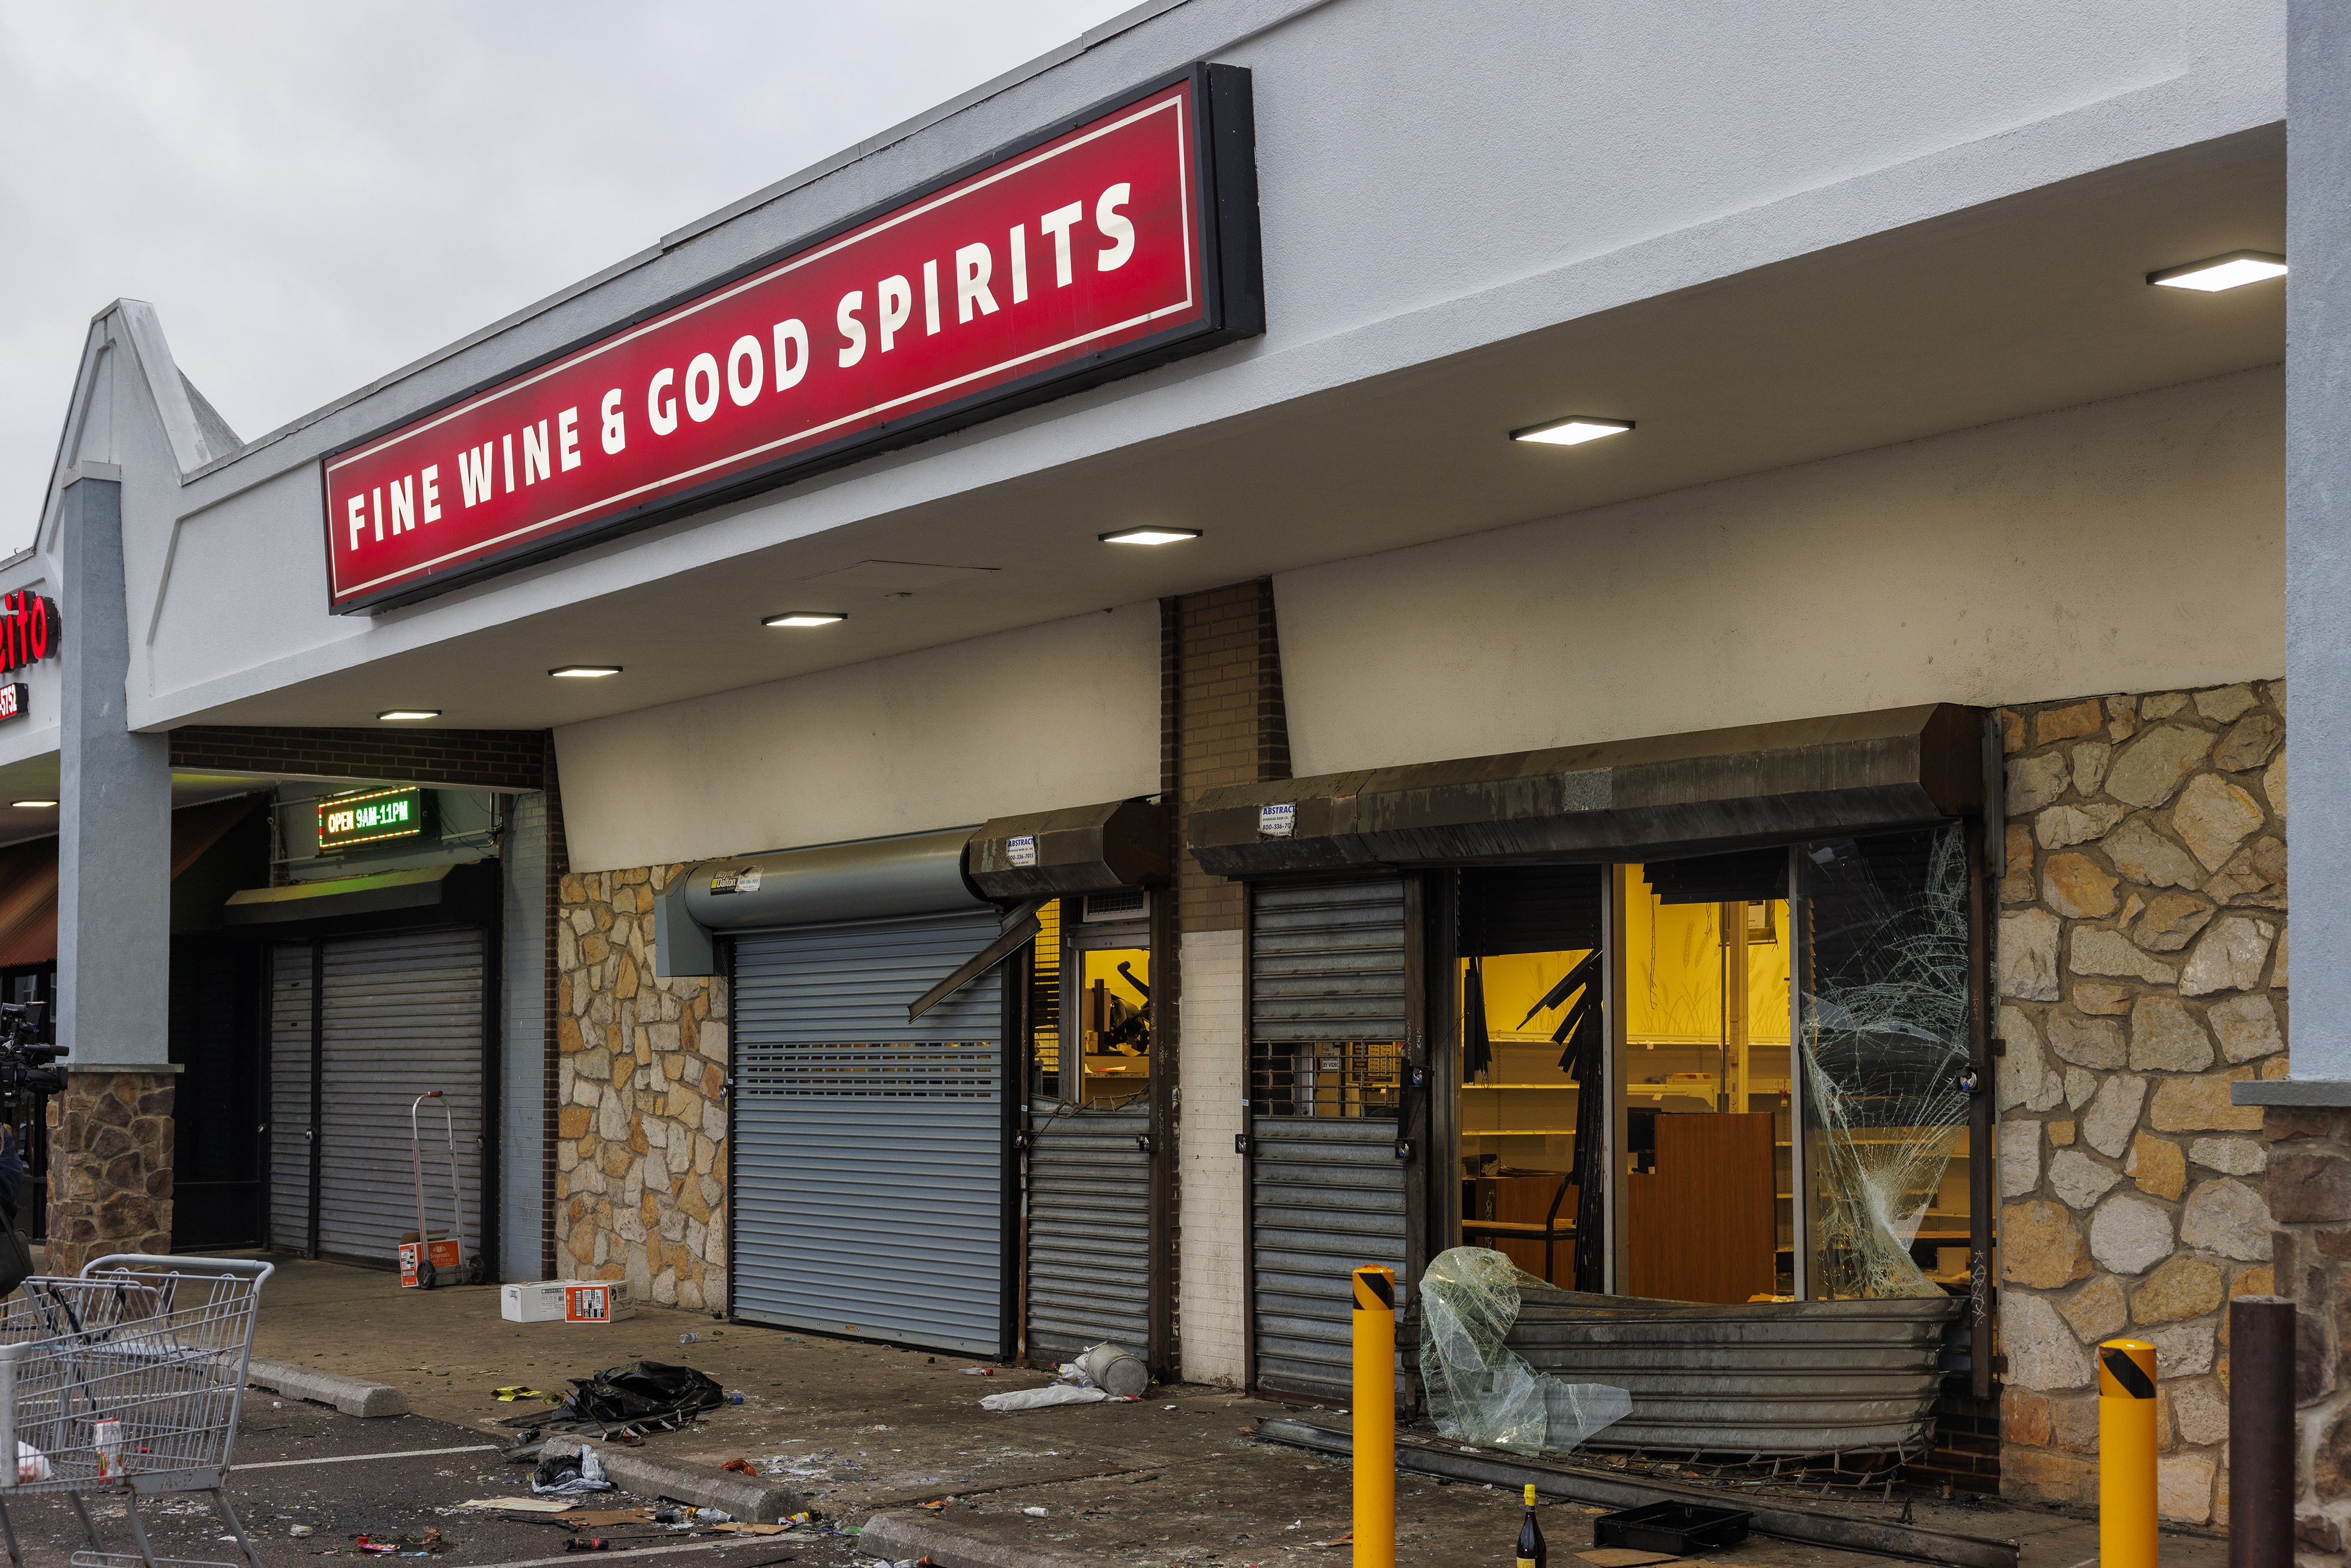 Philly looting: Over 50 arrested. Dozens of liquor outlets are